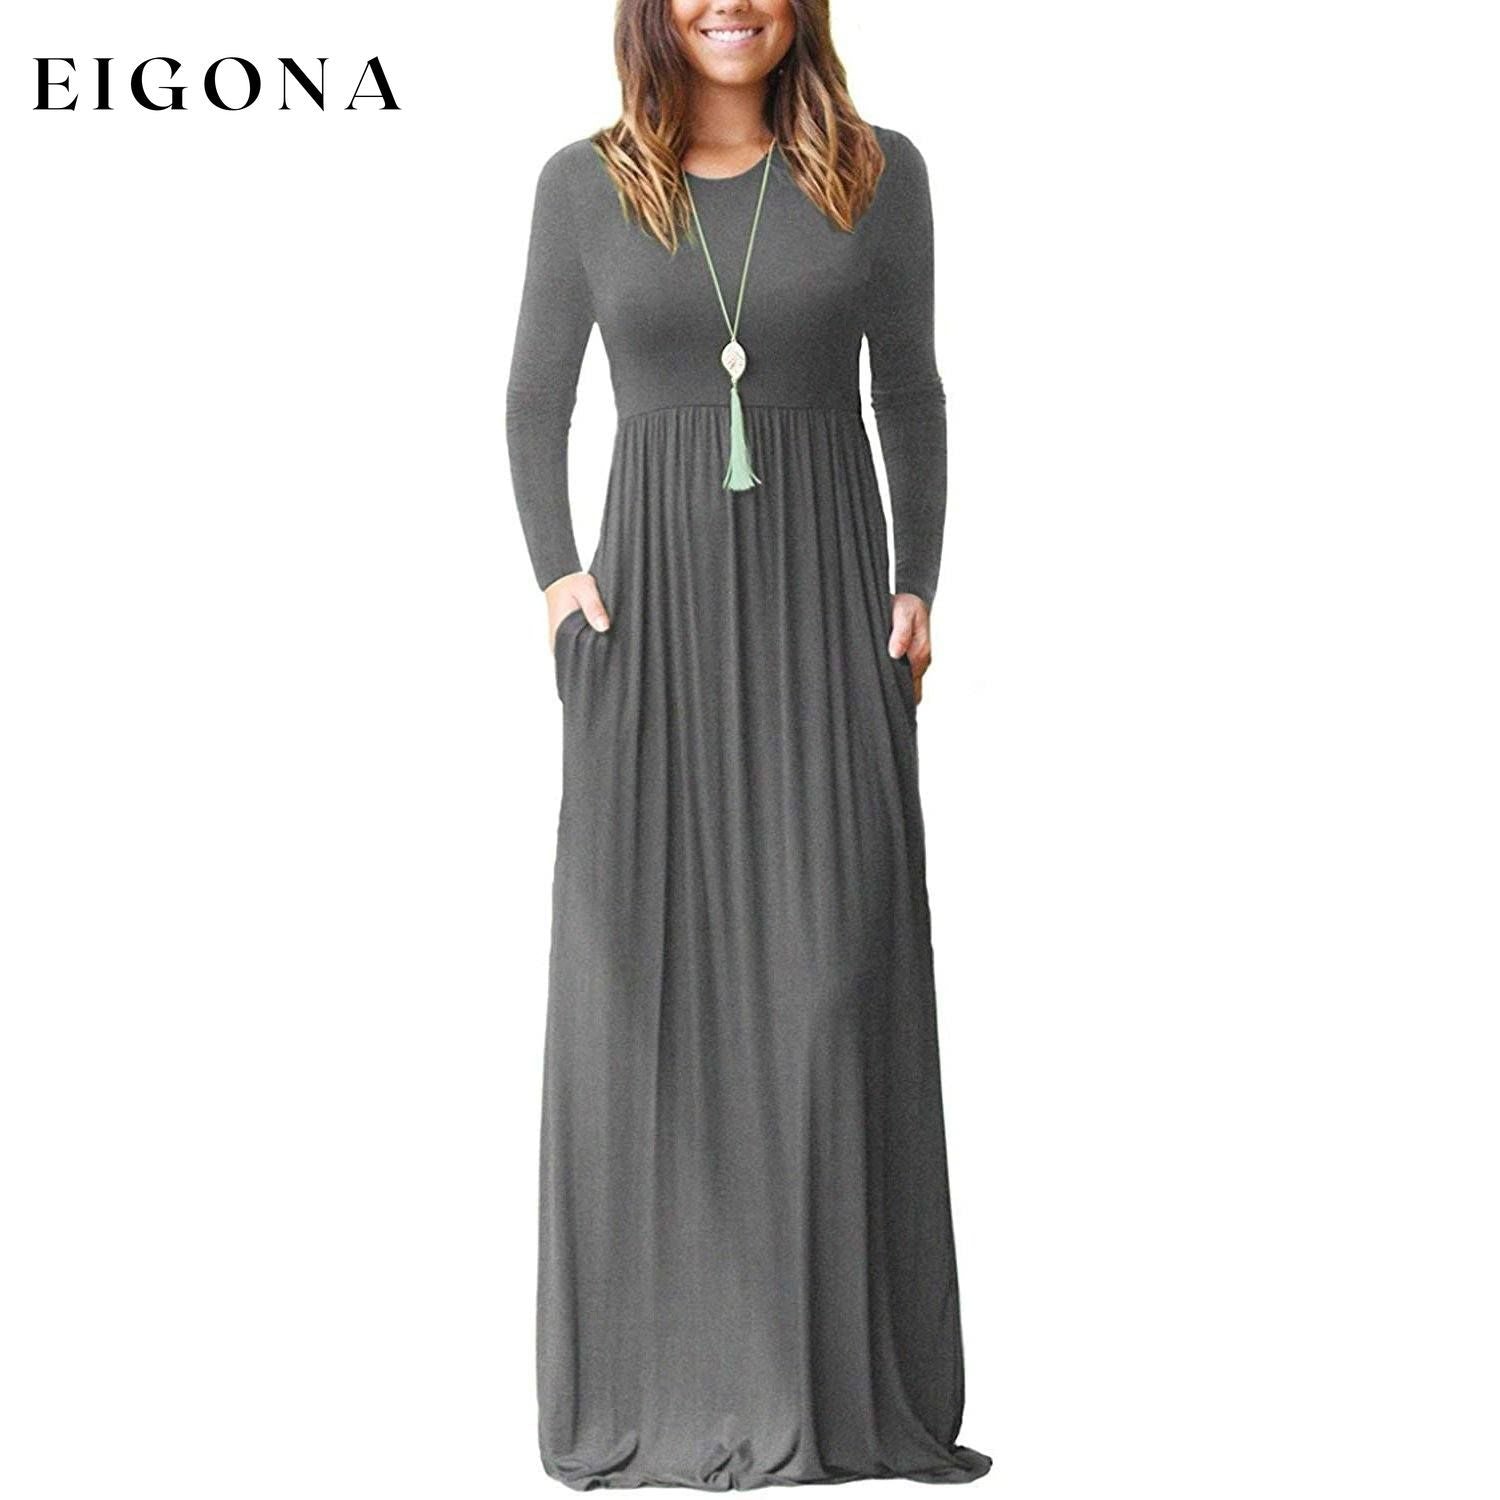 Women Long Sleeve Loose Plain Maxi Dresses Casual Long Dresses with Pockets Gray __stock:500 casual dresses clothes dresses refund_fee:1200 show-color-swatches